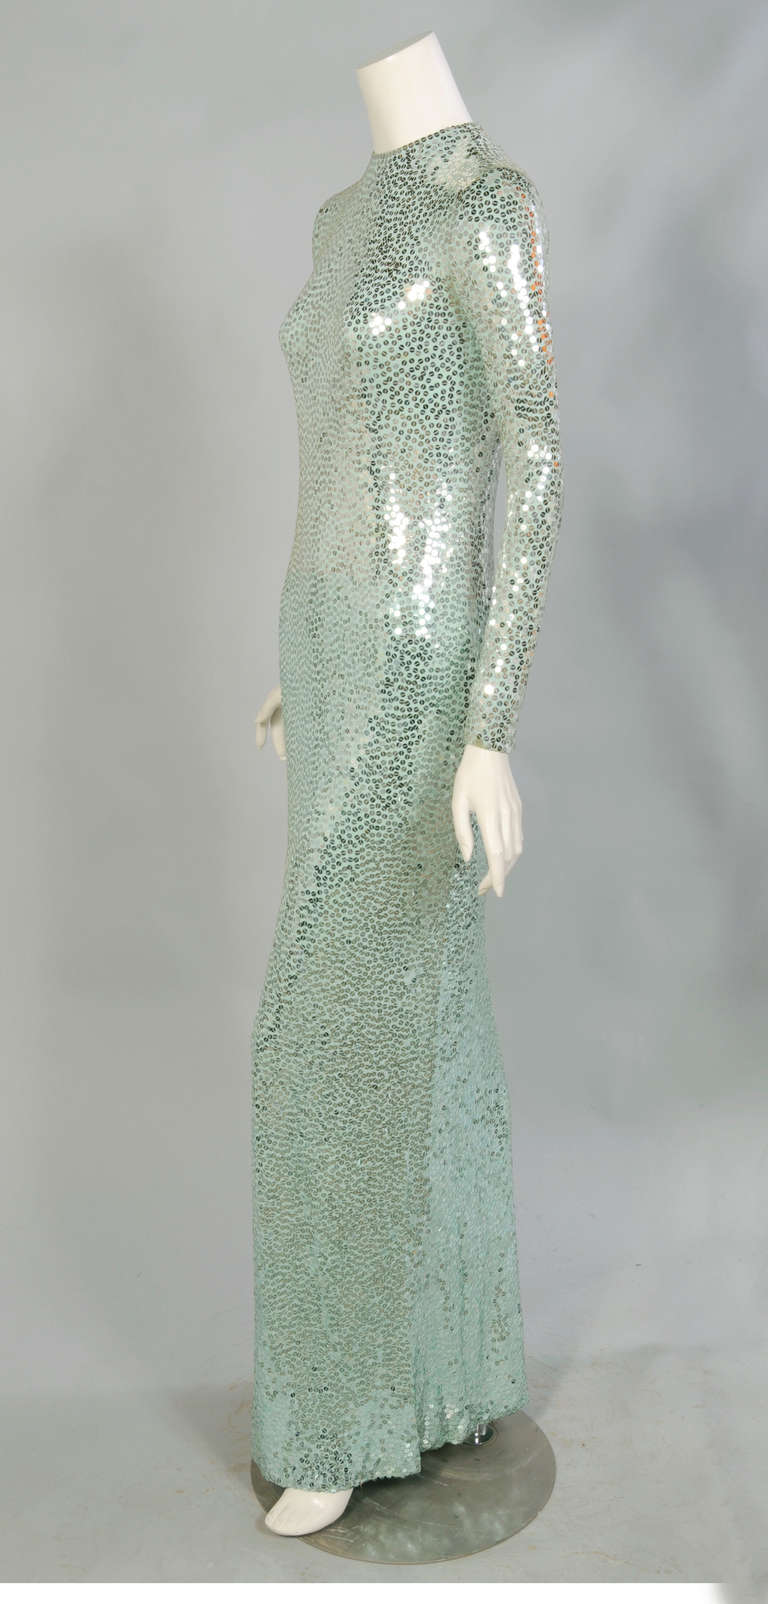 This dress is from the personal collection of Norell model and muse Denise. She has shared so many wonderful stories of her years working and traveling with Norman Norell. I am thrilled to be able to offer this stunning and iconic silver on  green